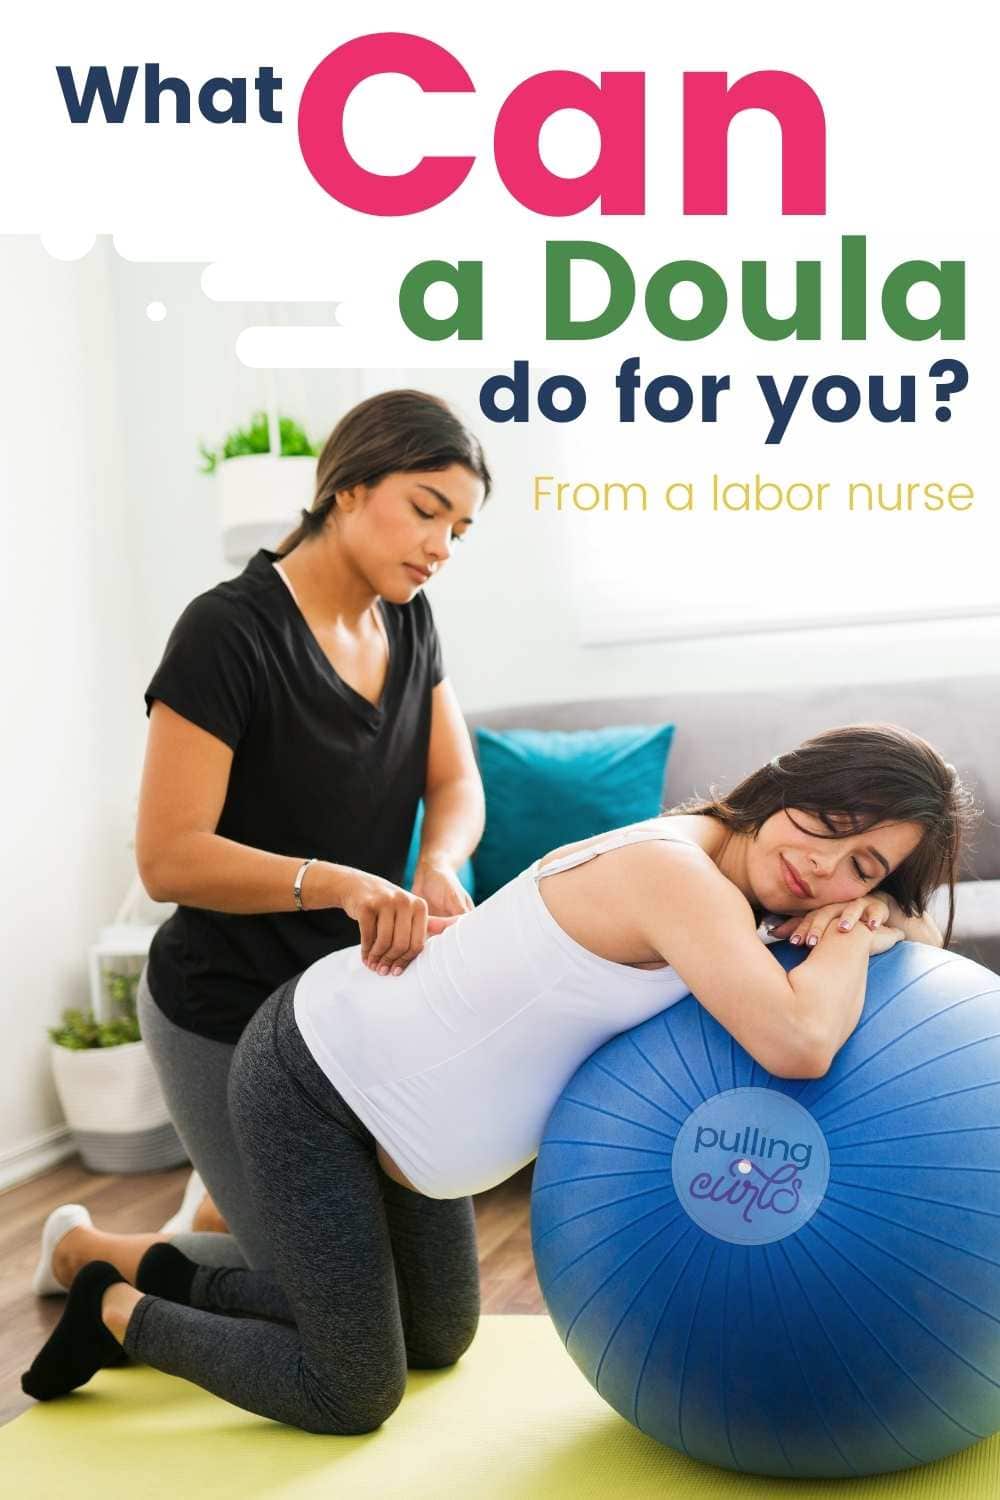 Doula Boundaries with Heidi Mills from WhatADoulaDo — Episode 135 via @pullingcurls